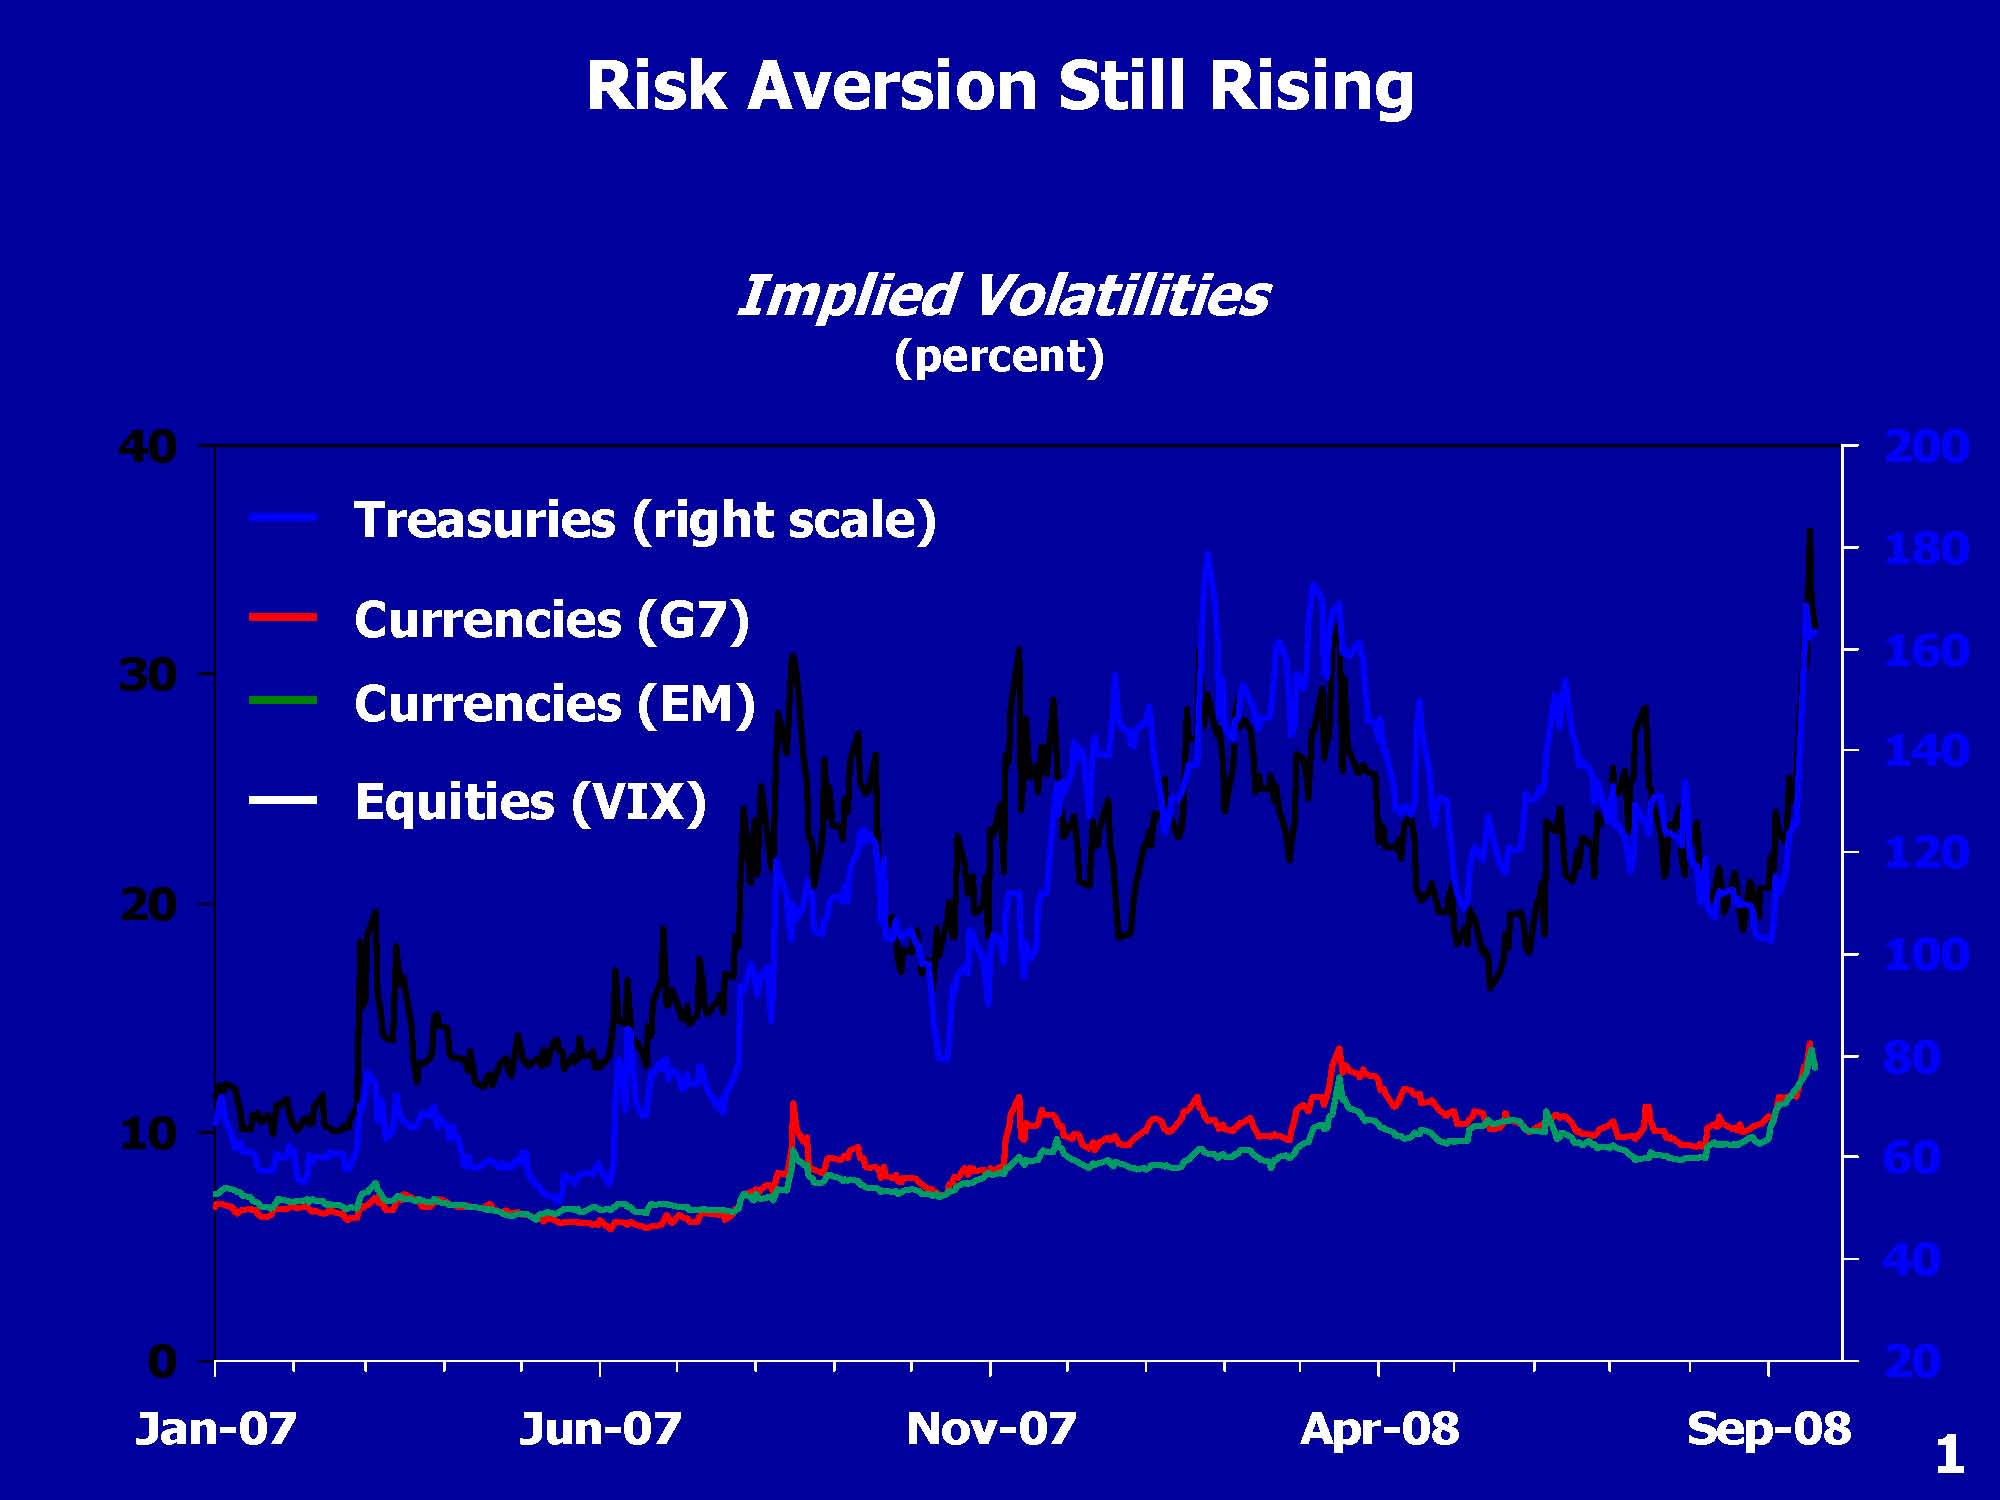 risk aversion continues to rise